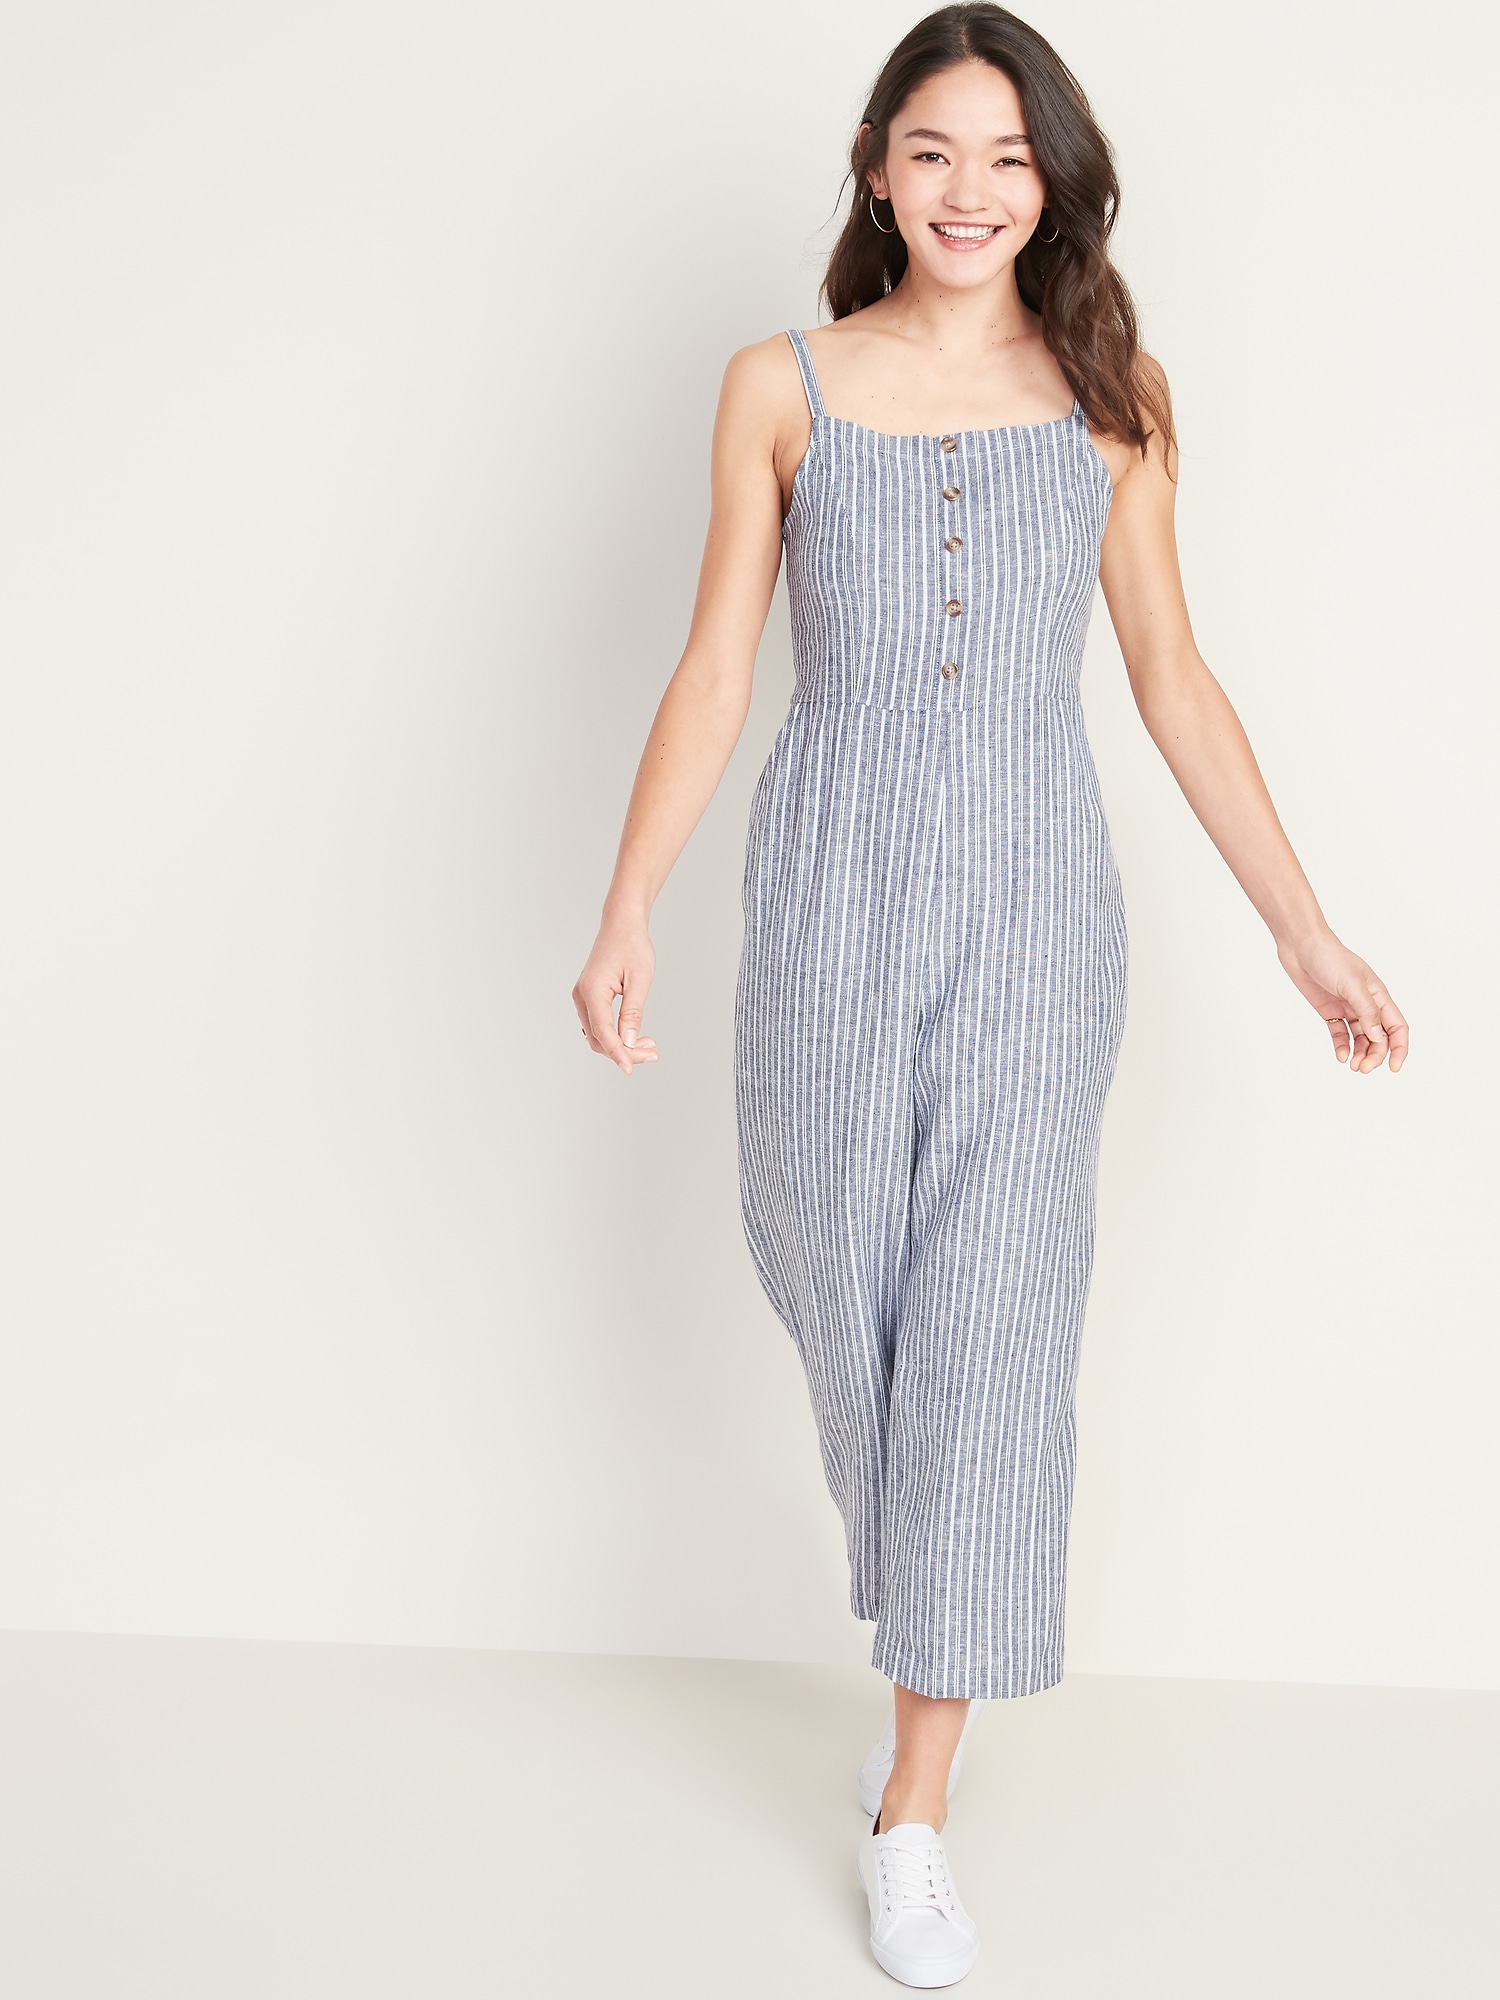 old navy jumpsuit striped